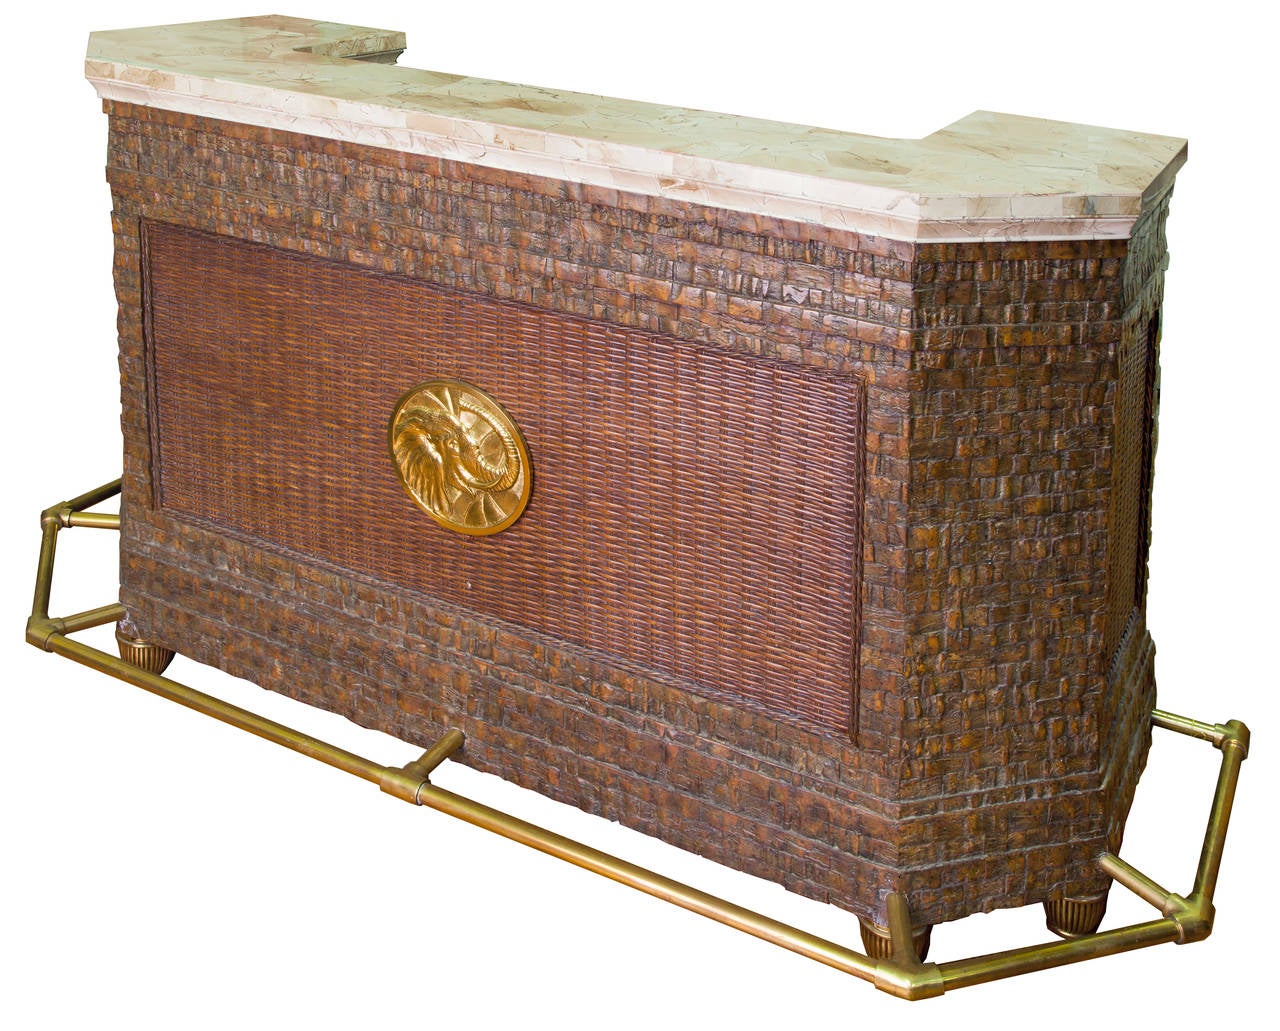 Finely detailed Maitland-Smith bar in an Art Nouveau Safari Fantasy style with fitted mahogany interior with cast brass bamboo hardware, the body covered in split marble veneer with woven wicker inset panel, featuring a finely cast brass elephant